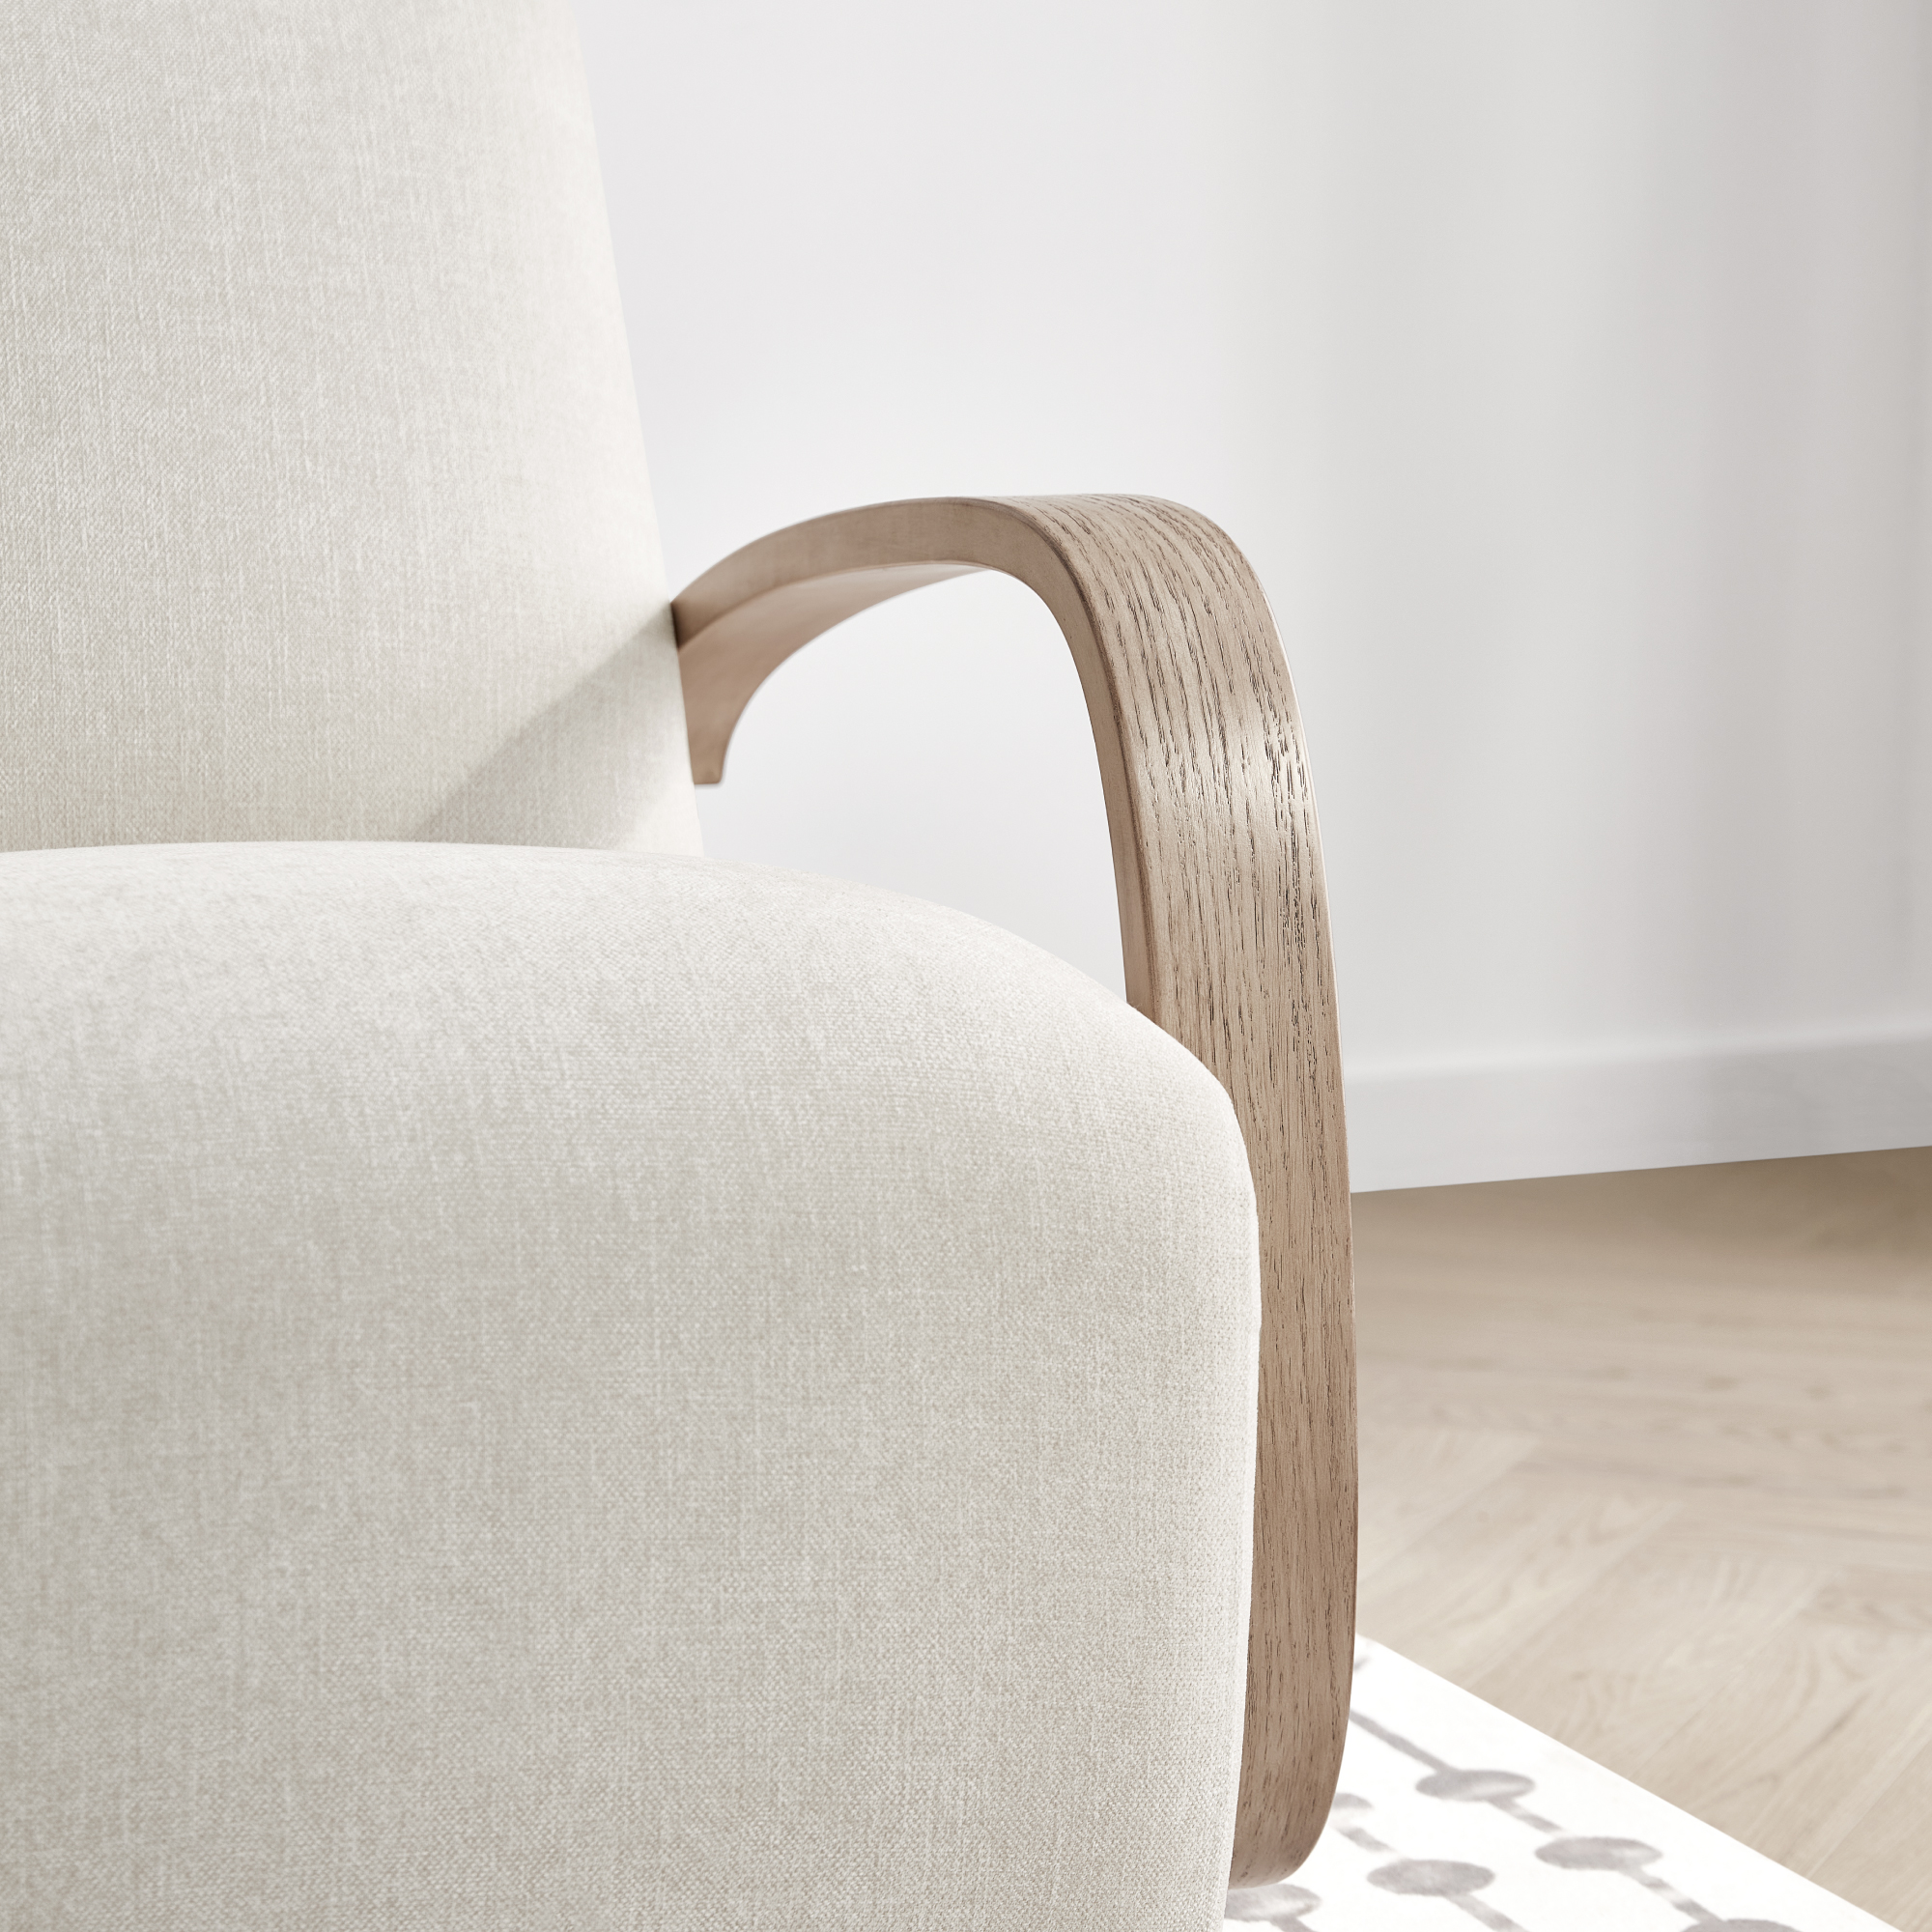 CHITA Swivel Accent Chair with U-shaped Wood Arm for Living Room Beedroom, Linen & Gray Wood - image 3 of 9